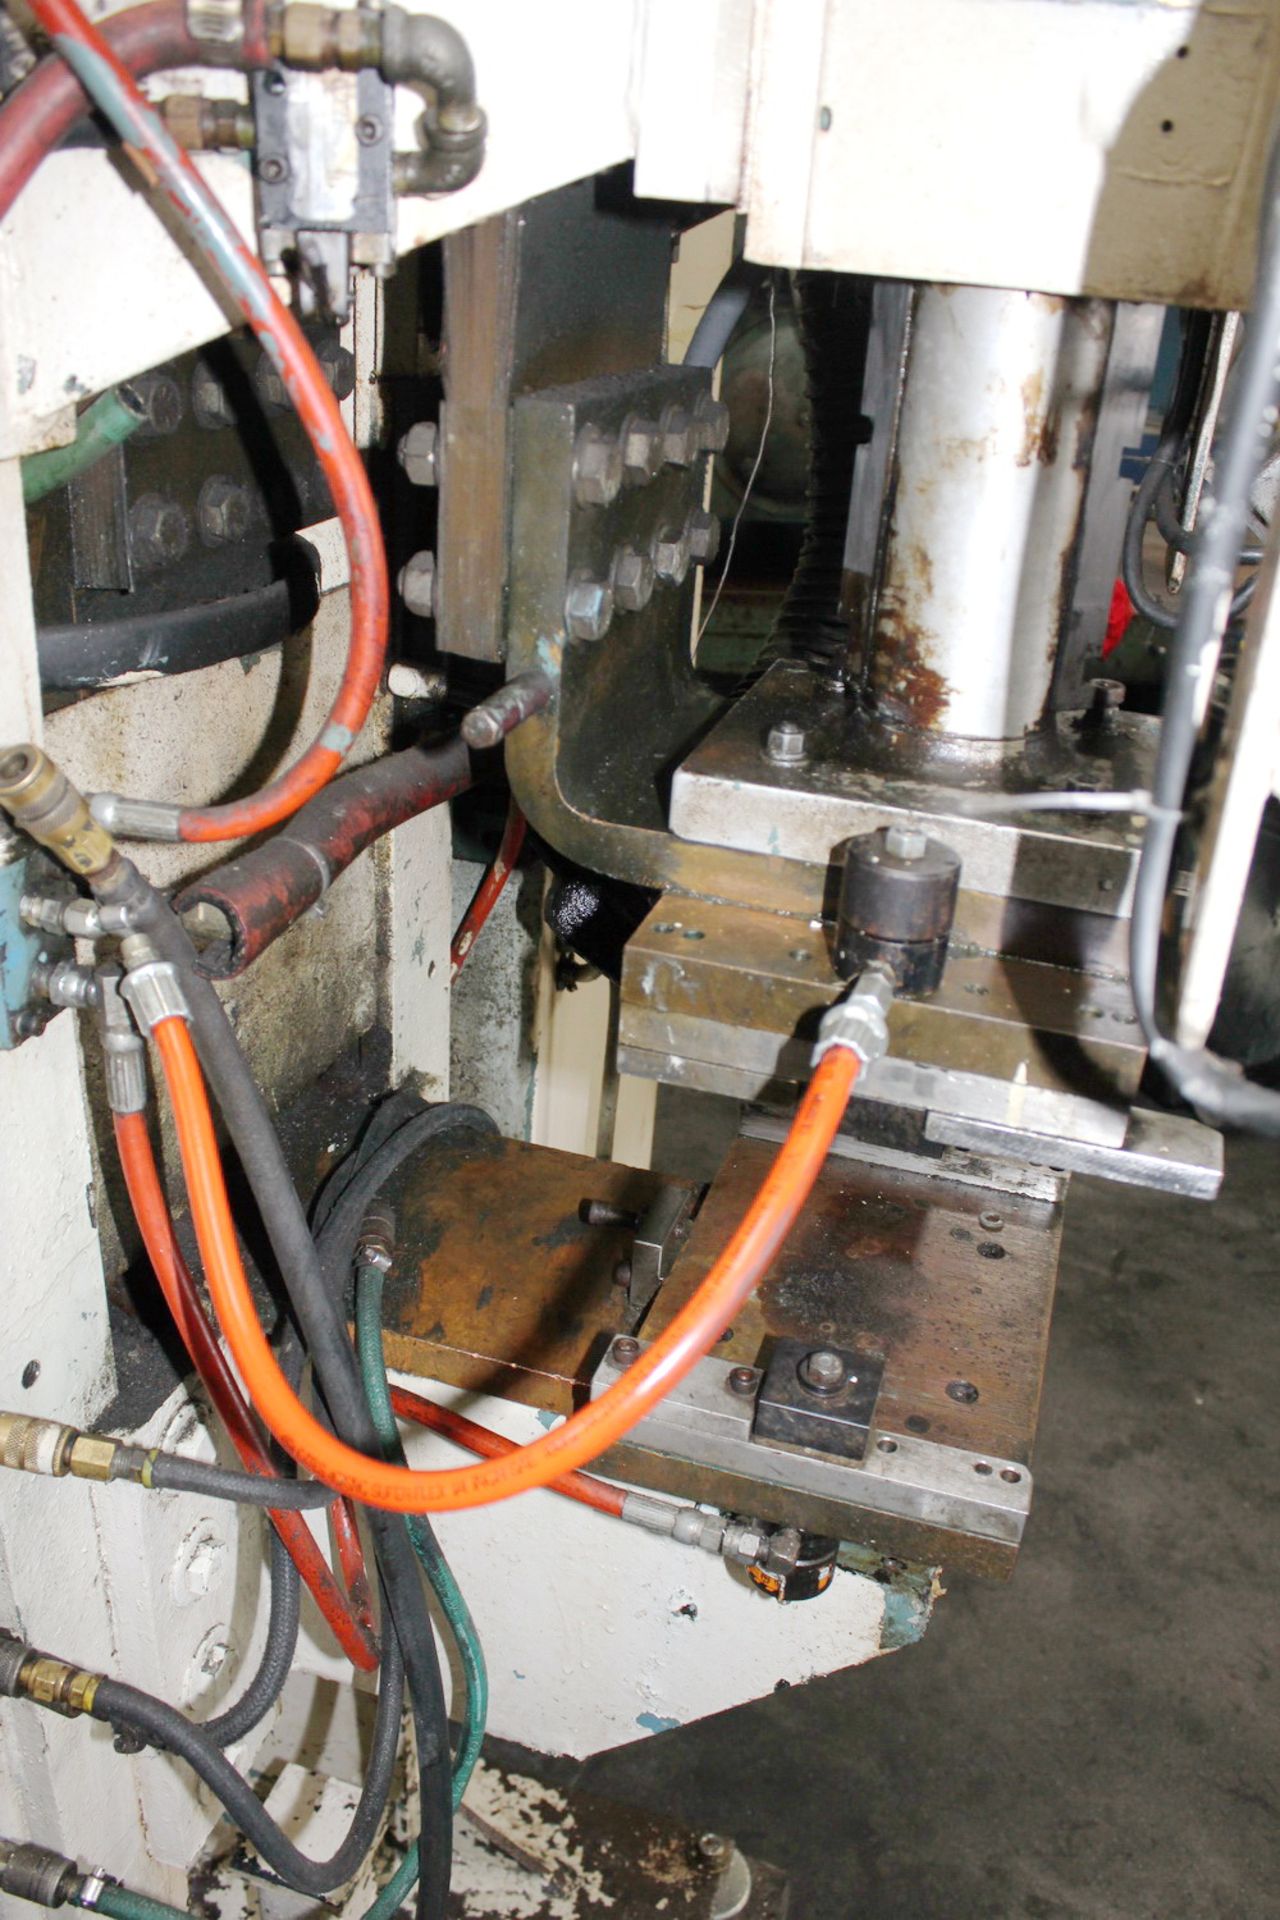 Hoffman Press Type Spot Welder 125 KVA x 14''. LOADING FEE FOR THIS LOT: $150 - Image 12 of 18